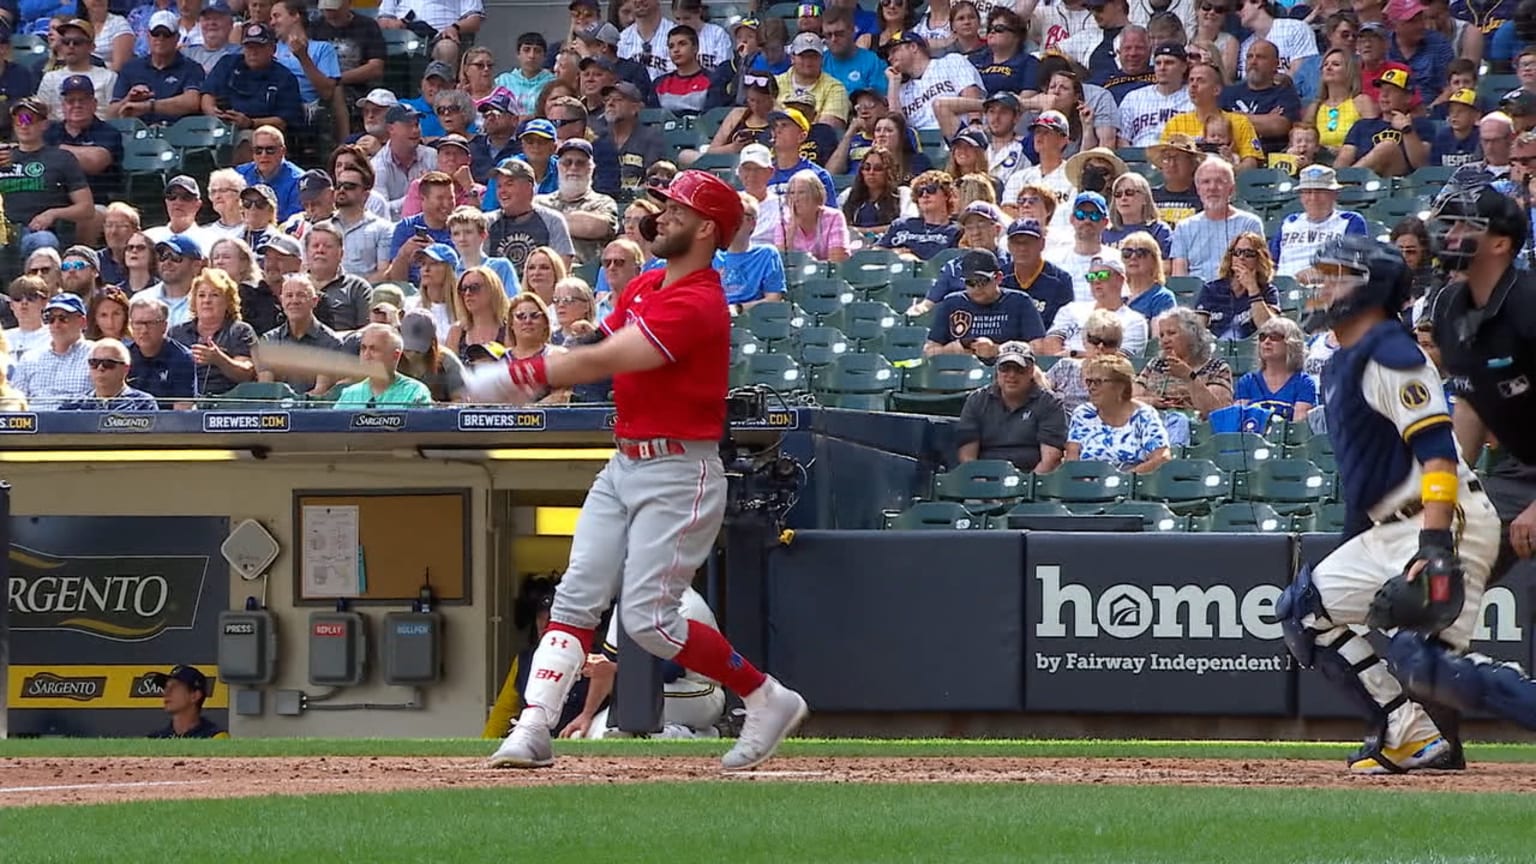 Bryce Harper crushes two home runs against the Blue Jays